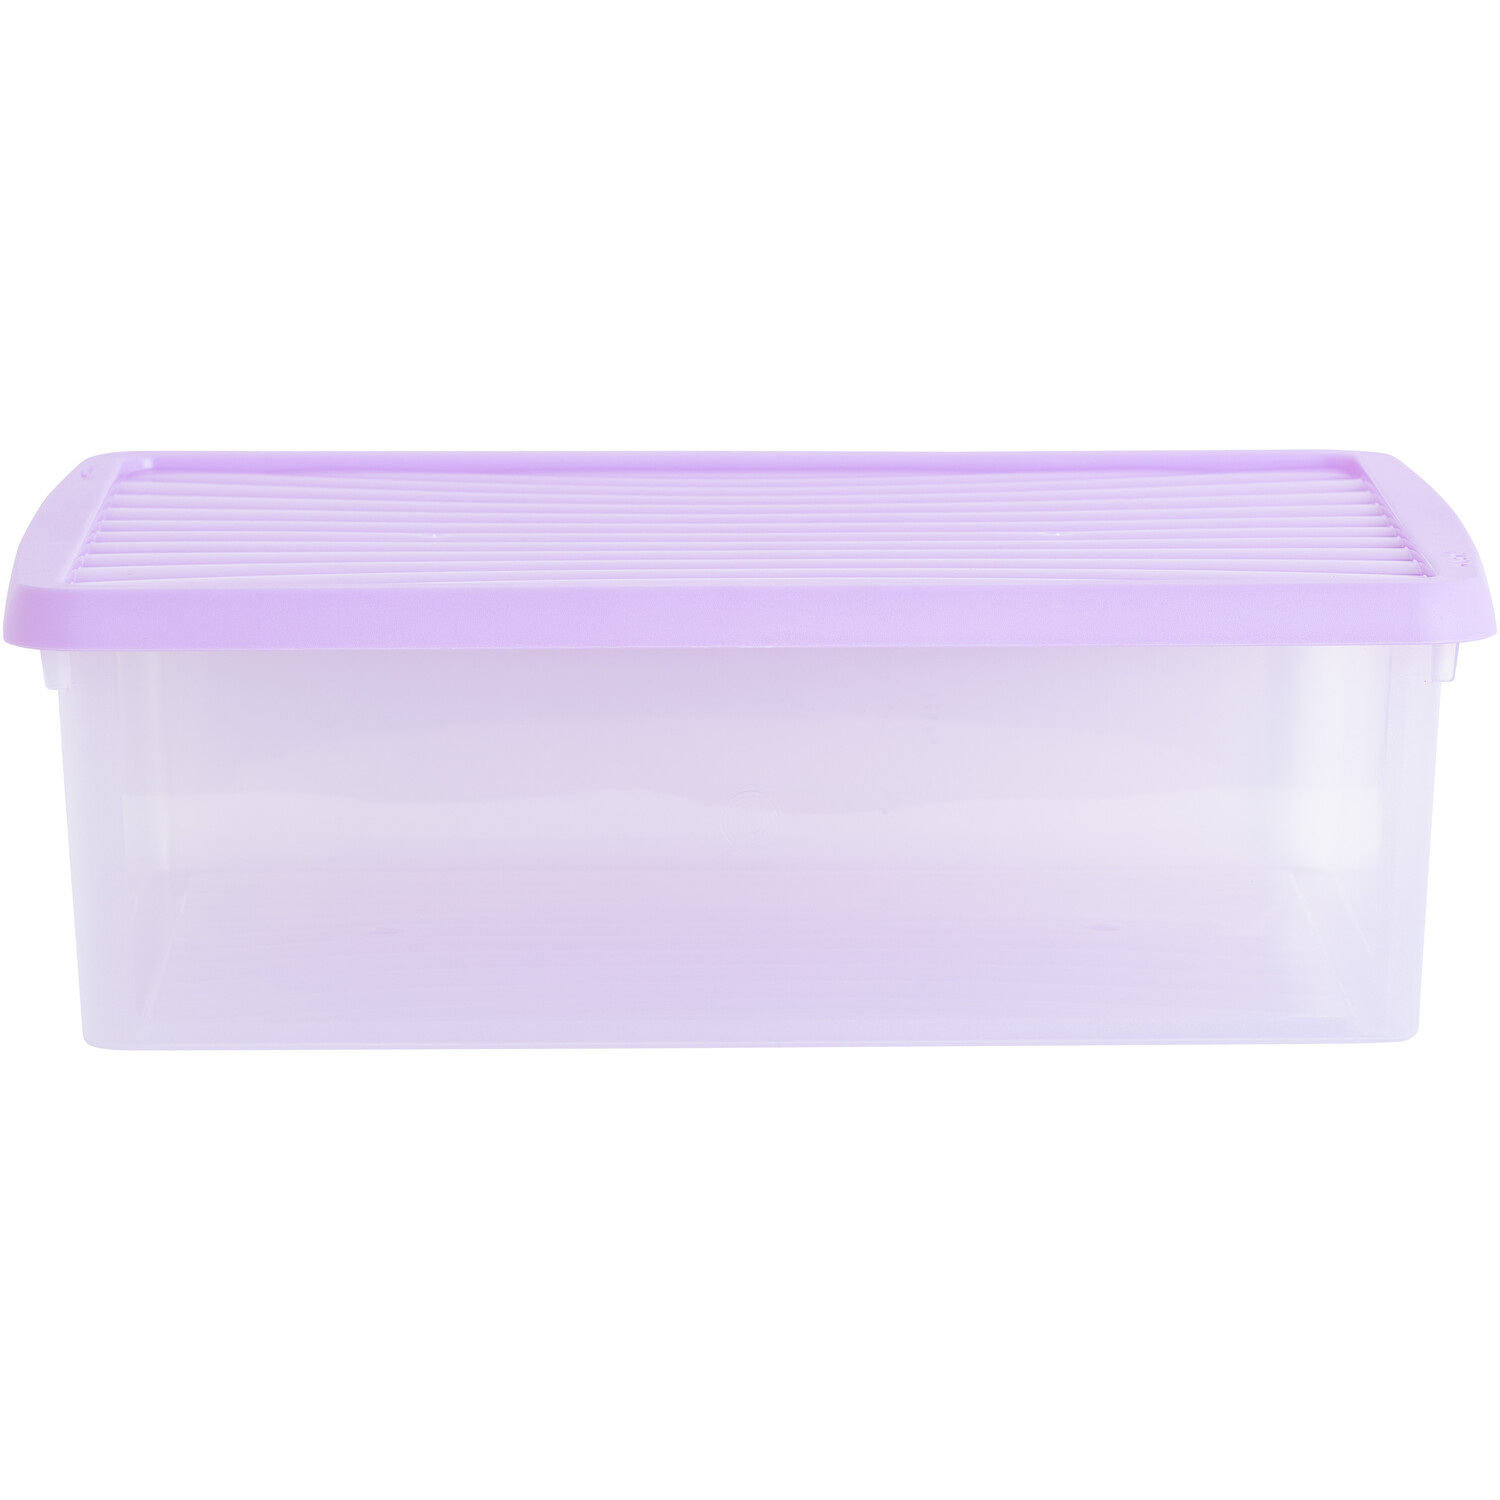 Single 23L Clear Stackable Storage Box with Lid in Assorted styles Image 6